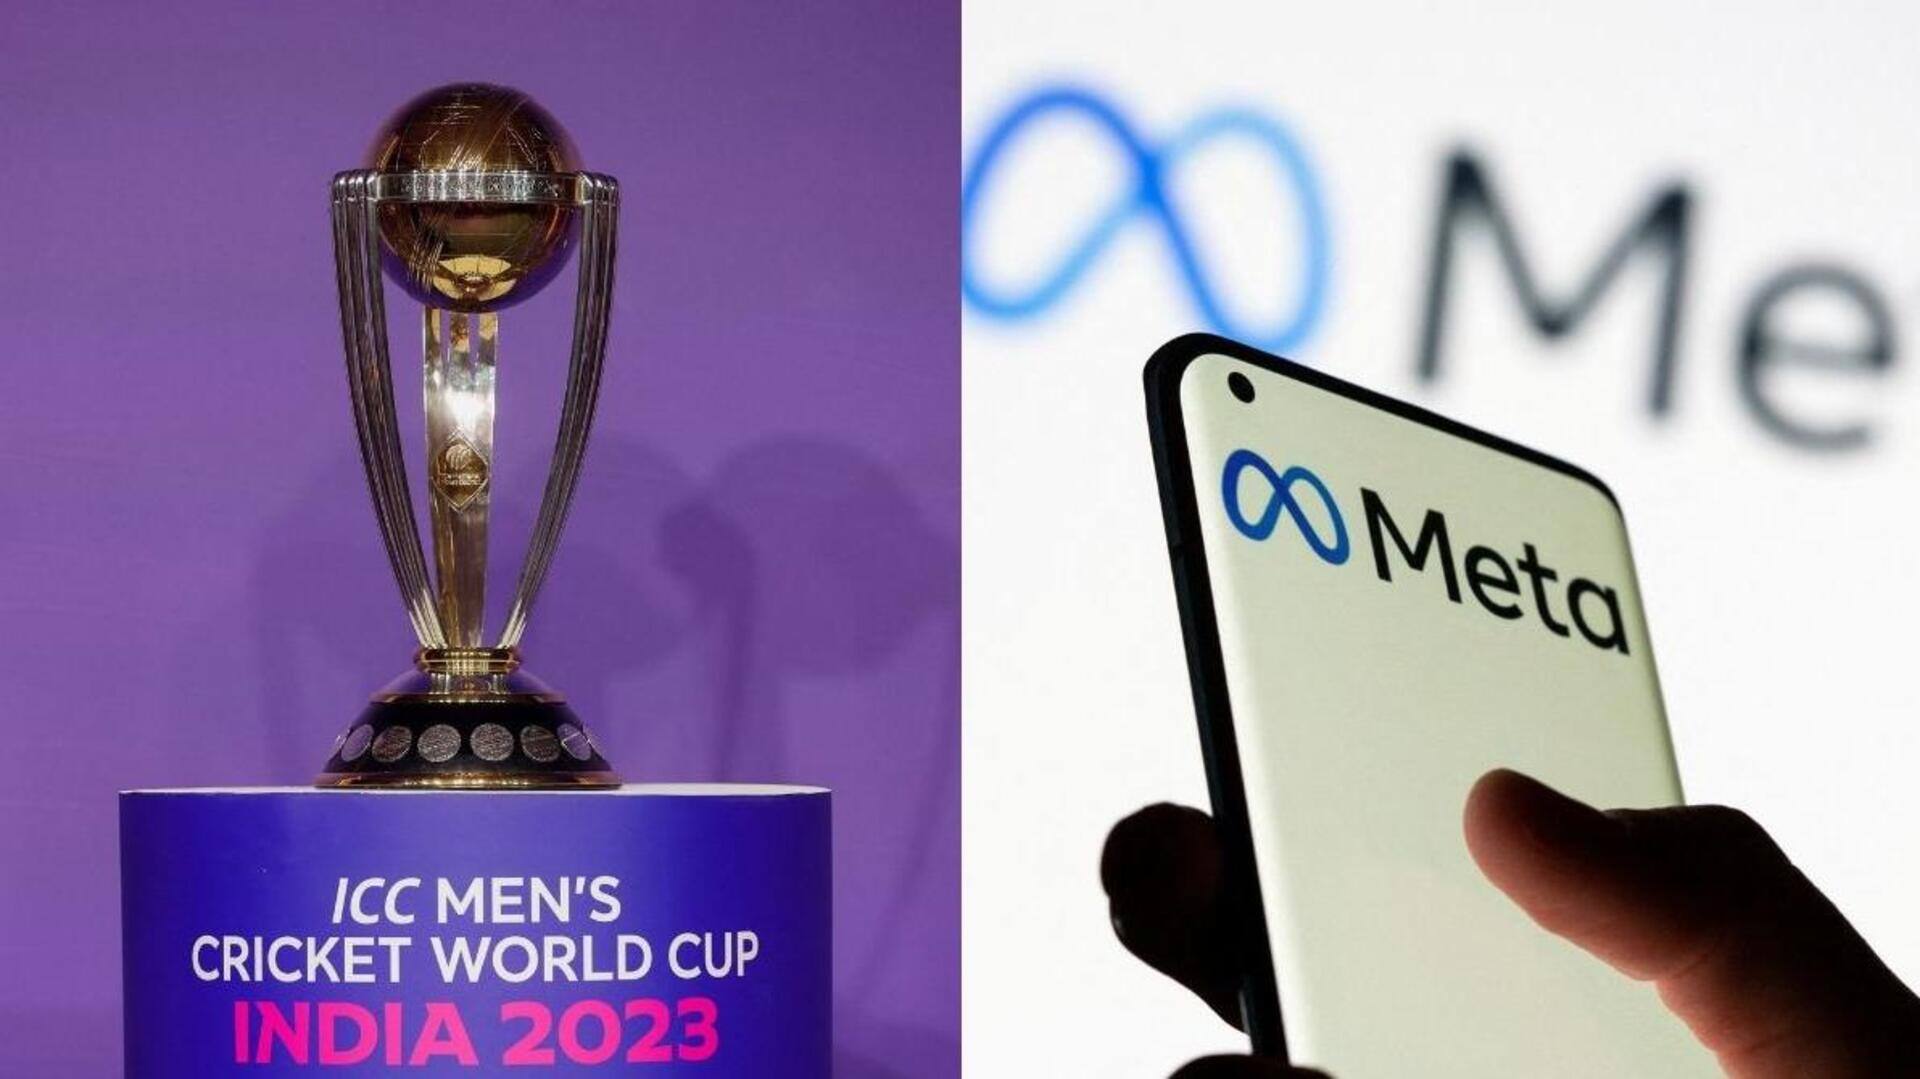 Meta and ICC team up for unprecedented World Cup coverage